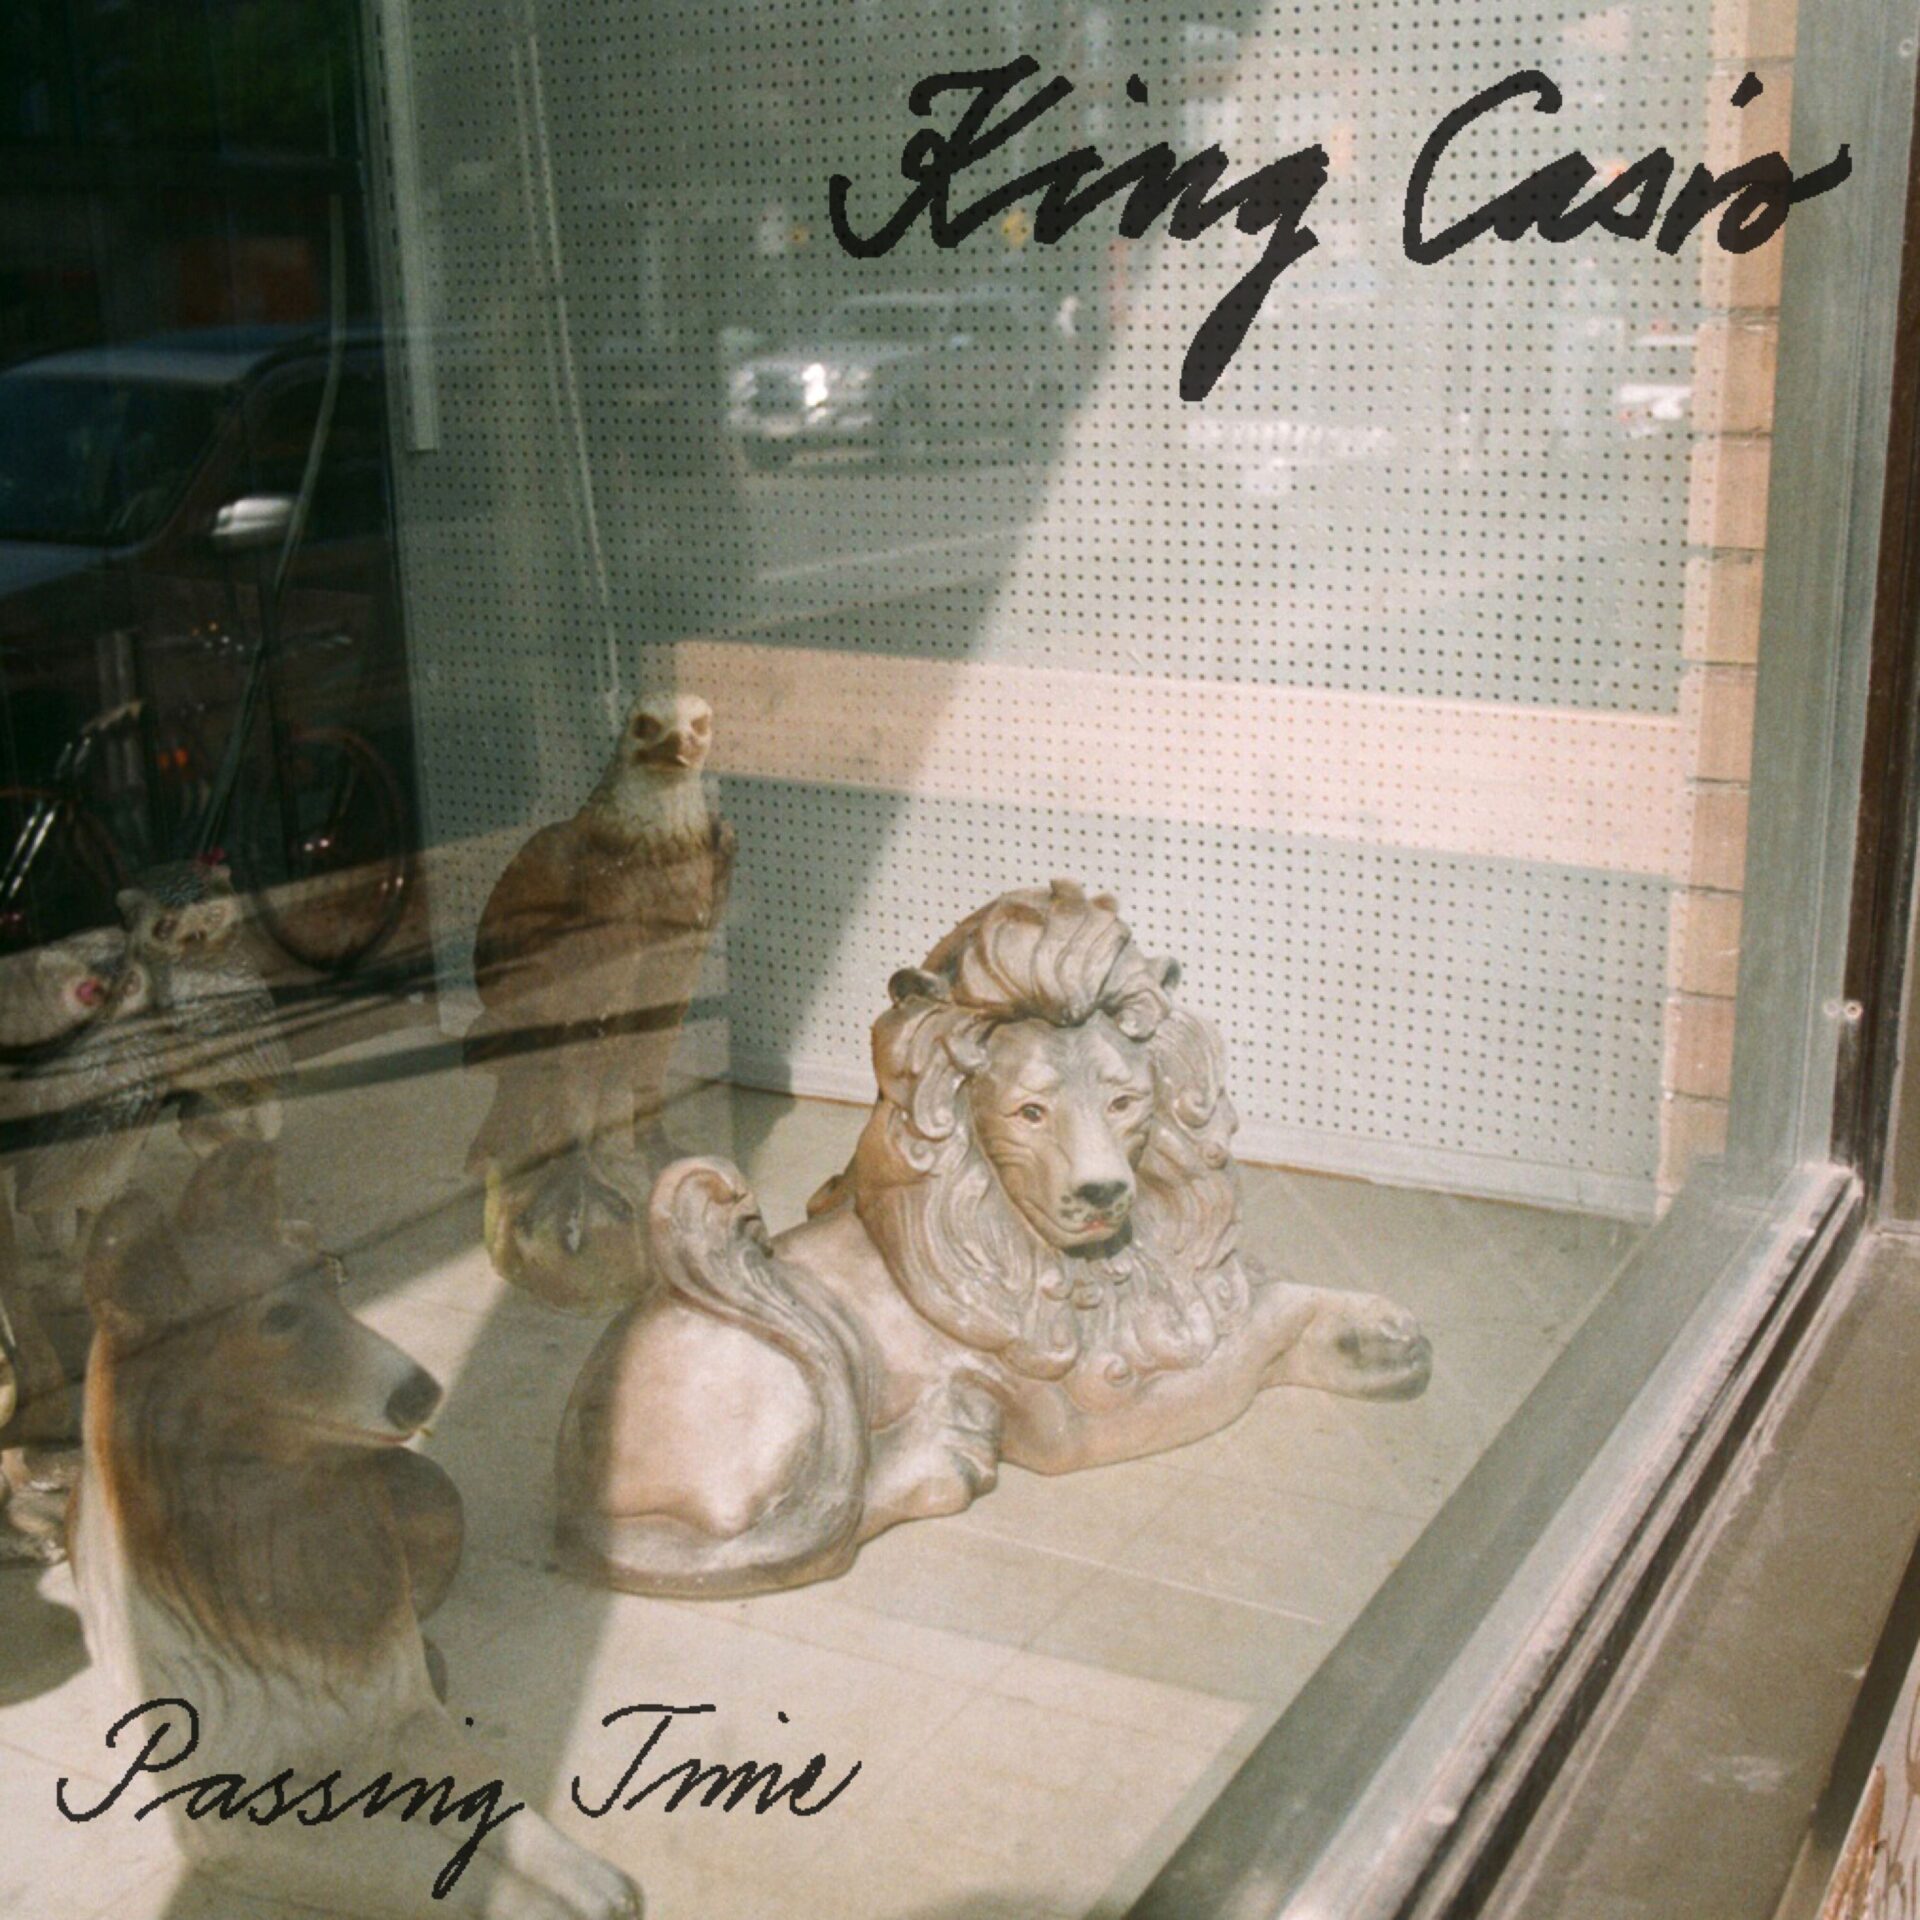 EXCLUSIVE PREMIERE: King Casio release new video and single 'Passing Time'